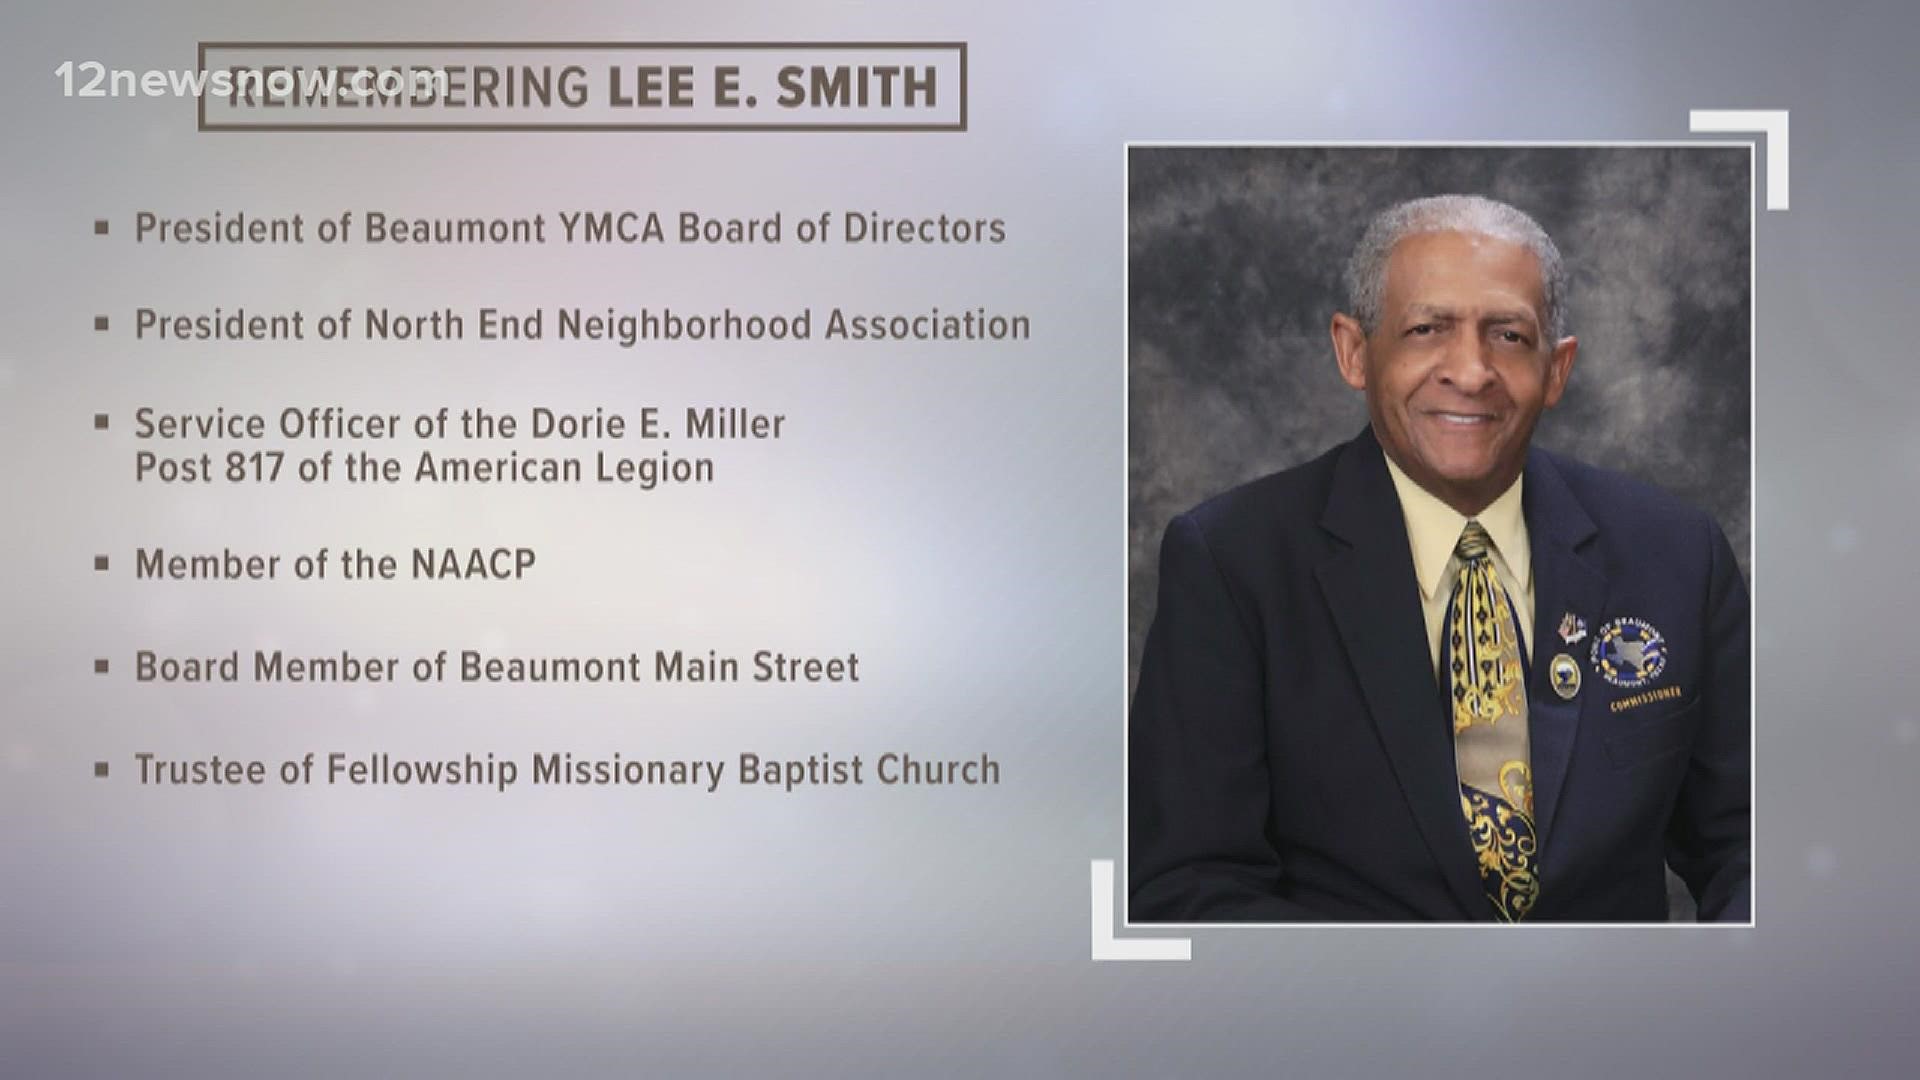 Lee Smith was the first black man to be elected president of the Port of Beaumont commissioners board. He was also active in many other organizations in Beaumont.